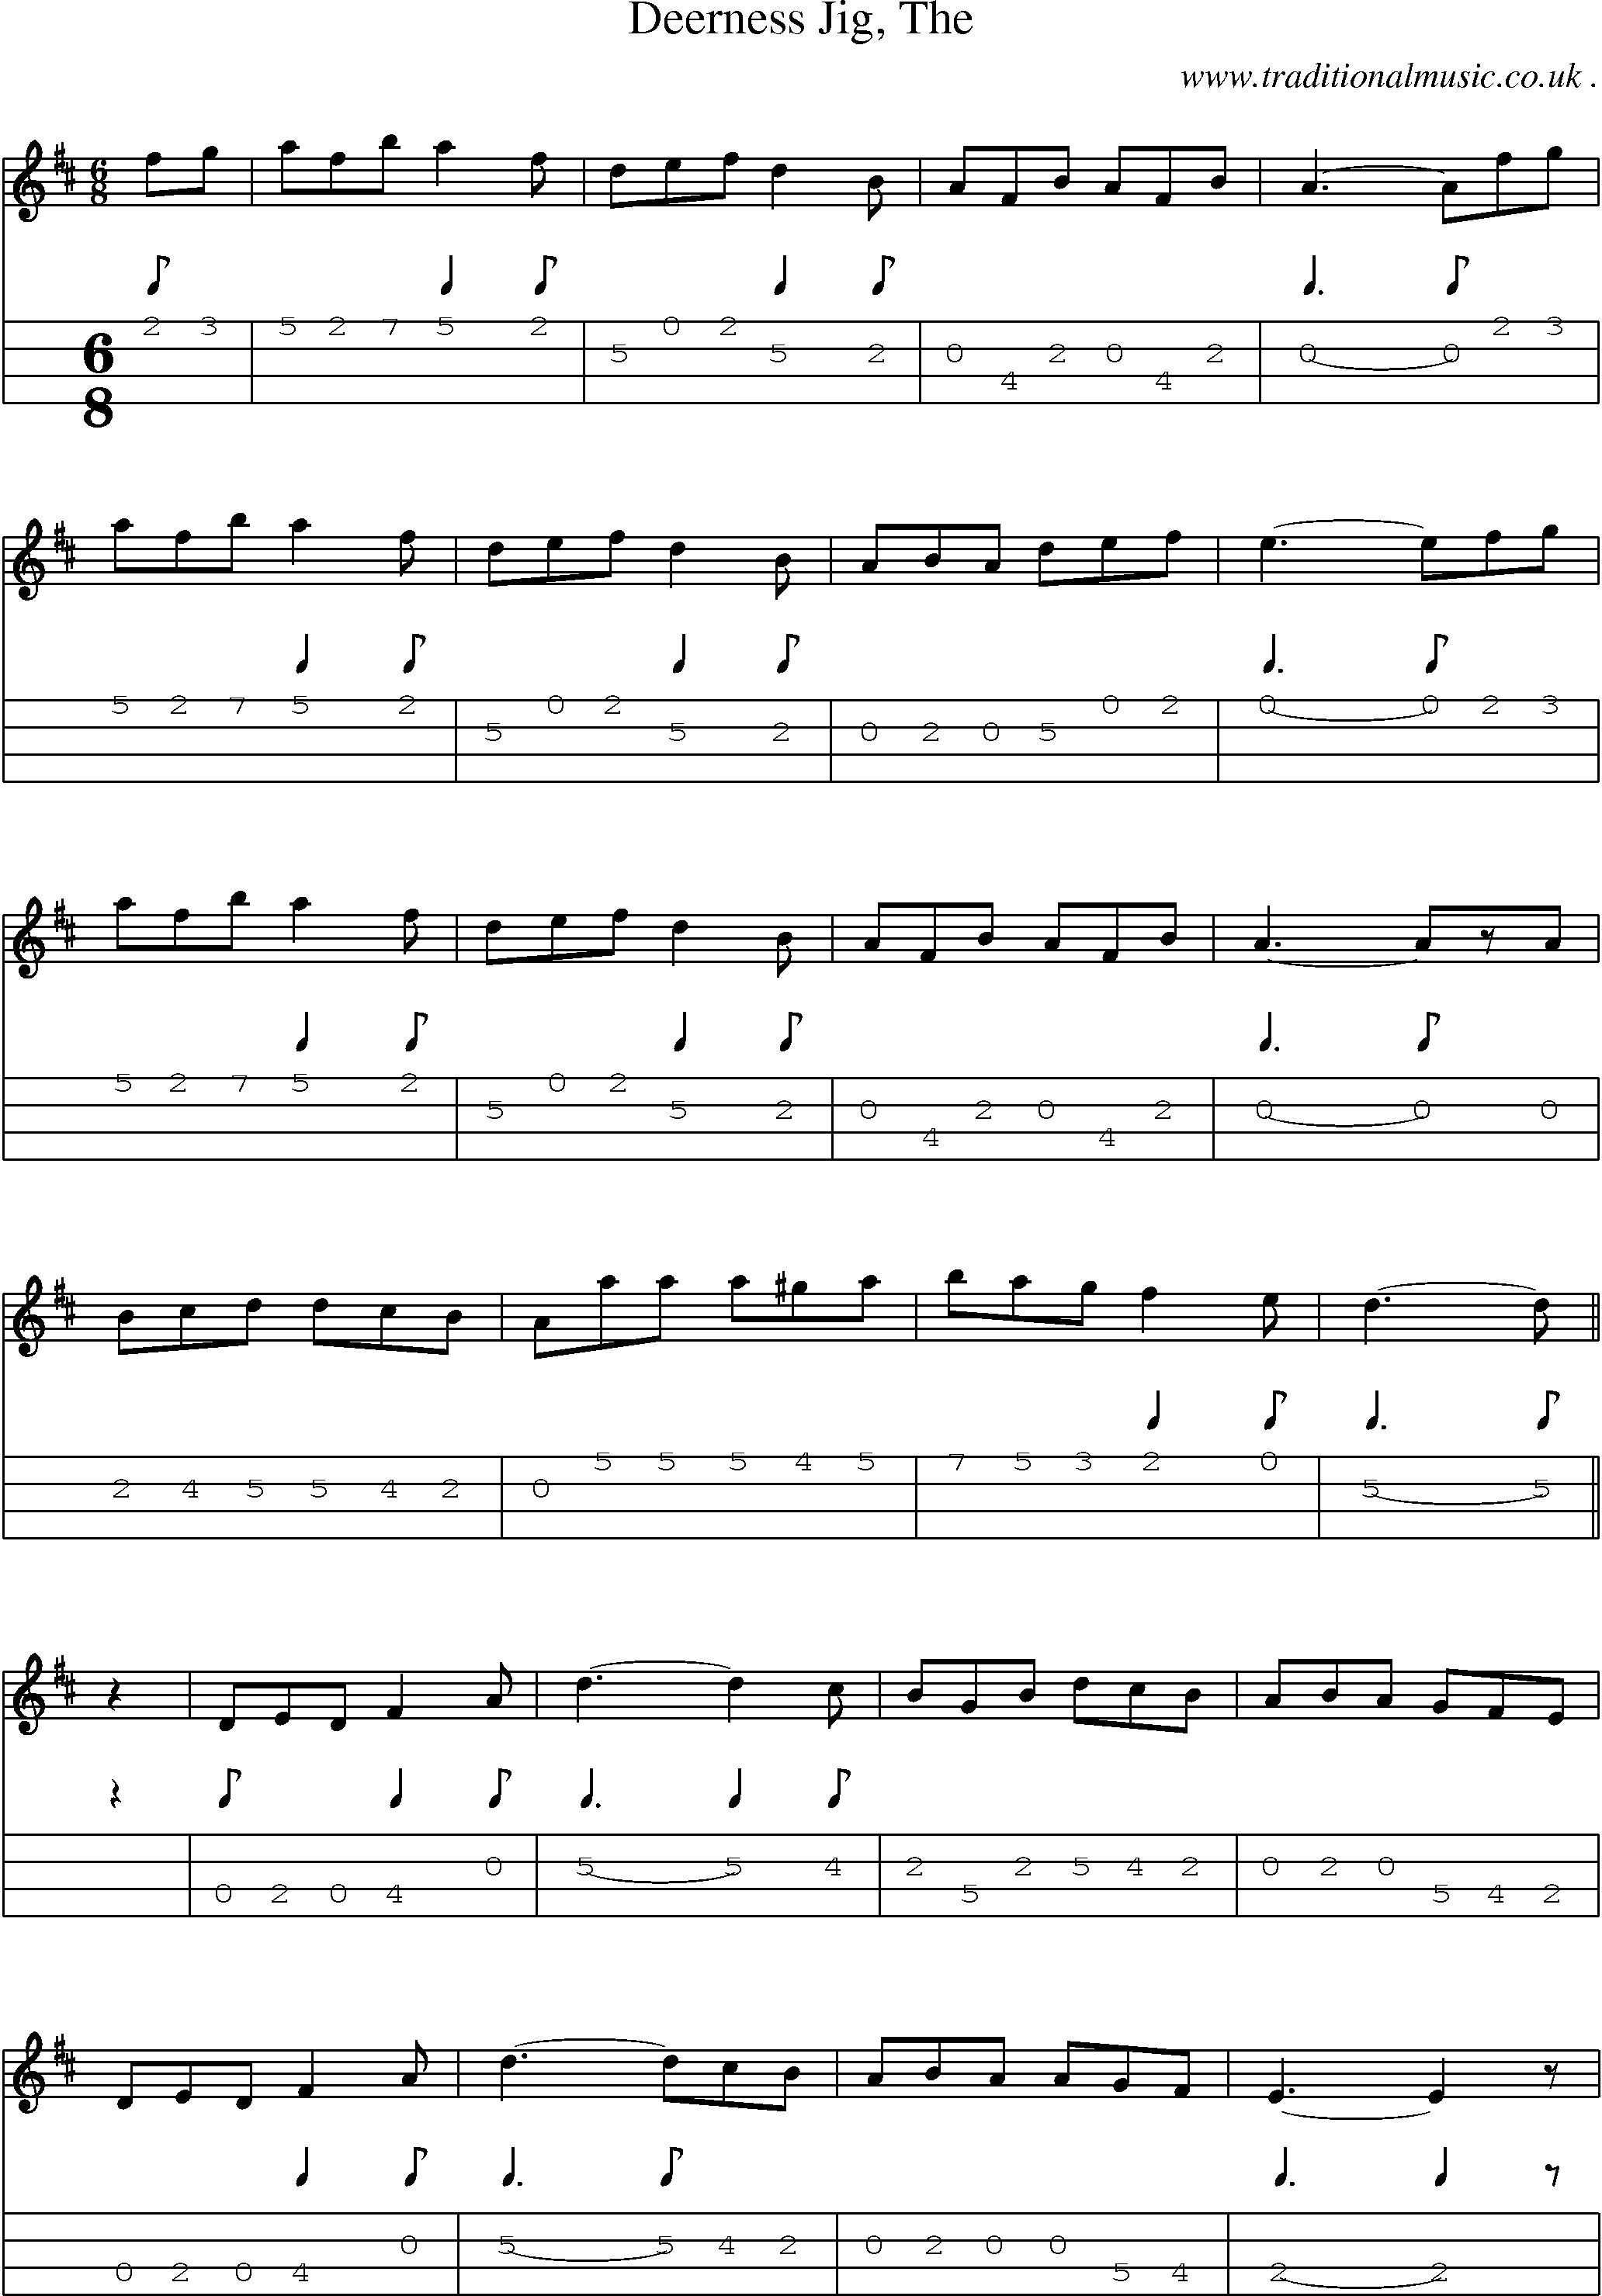 Sheet-music  score, Chords and Mandolin Tabs for Deerness Jig The